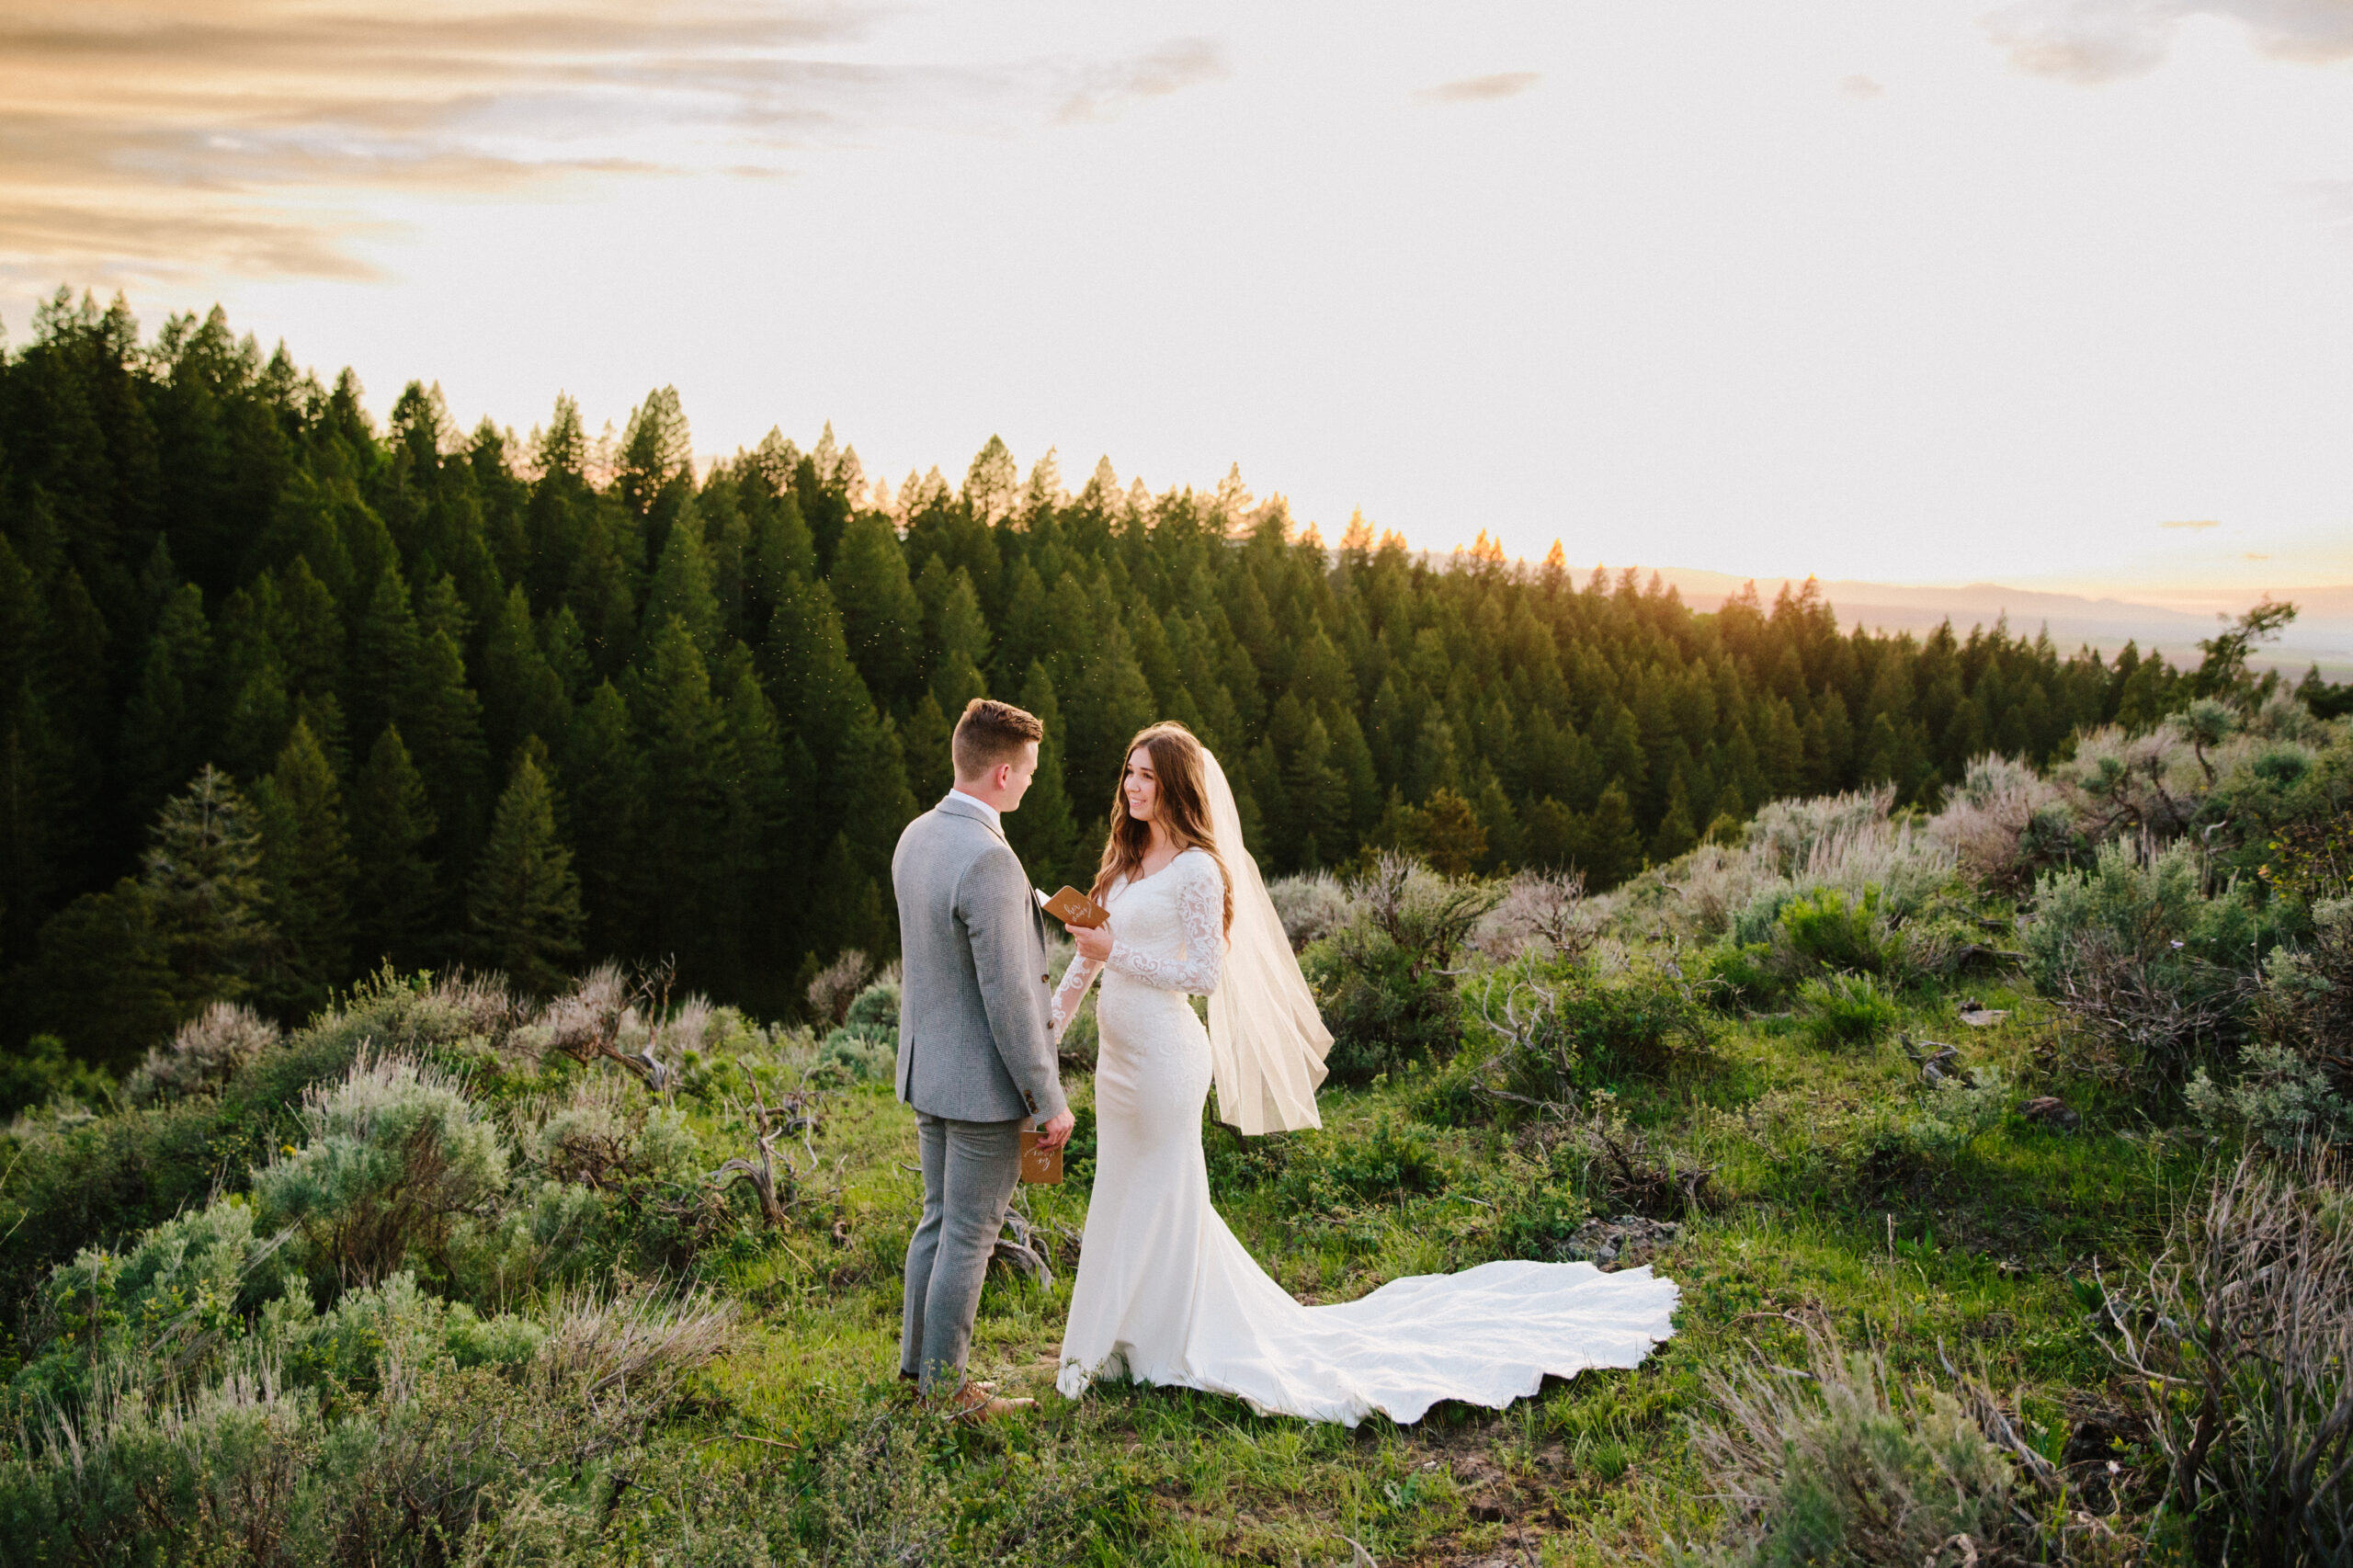 Jackson Hole photographers capture couple after first look at Sustainable Jackson Hole elopement